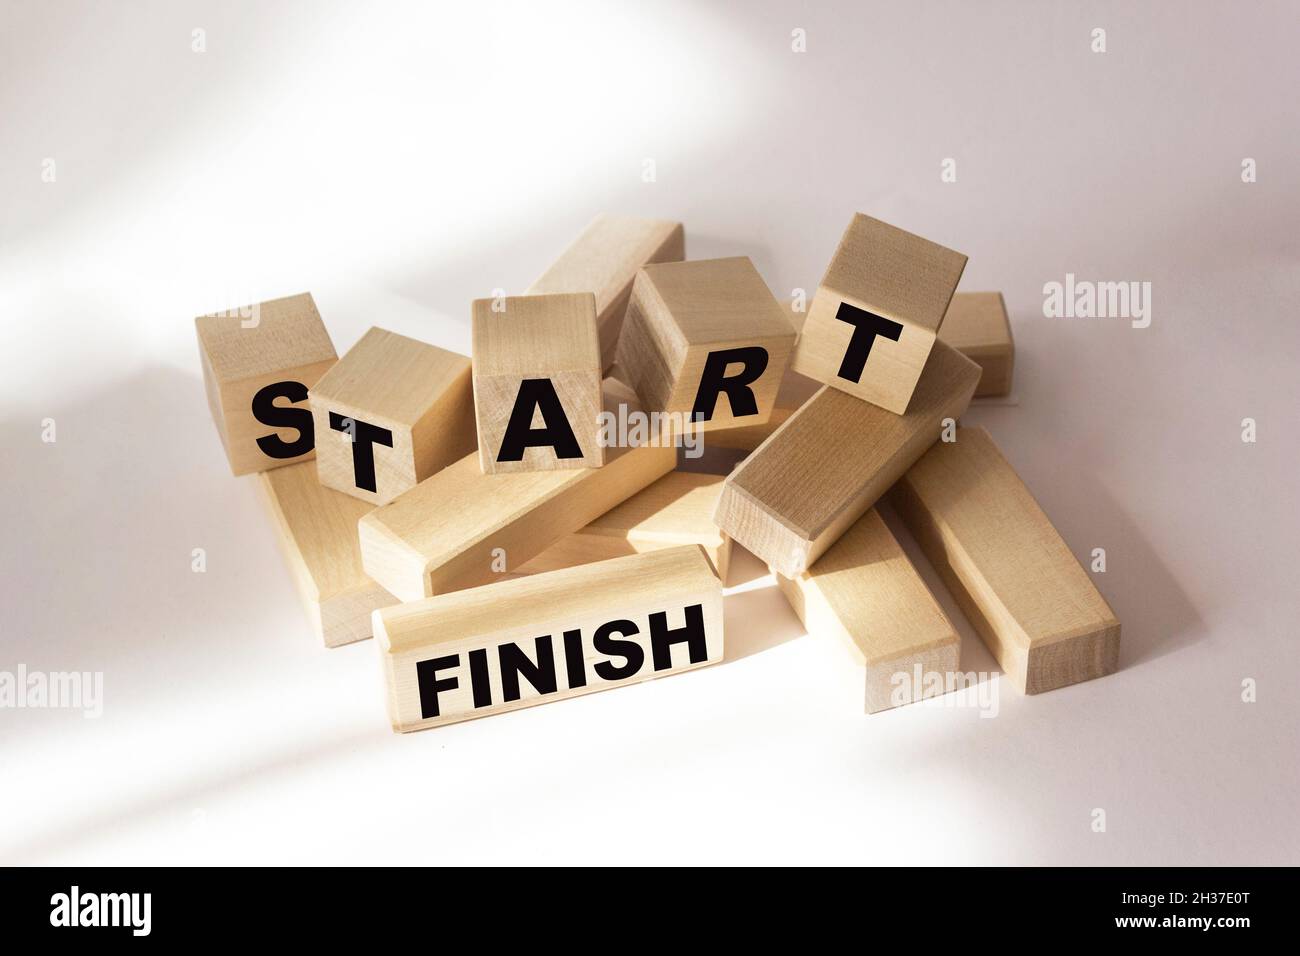 The words Start and Finish written on wooden blocks and a white background. Stock Photo